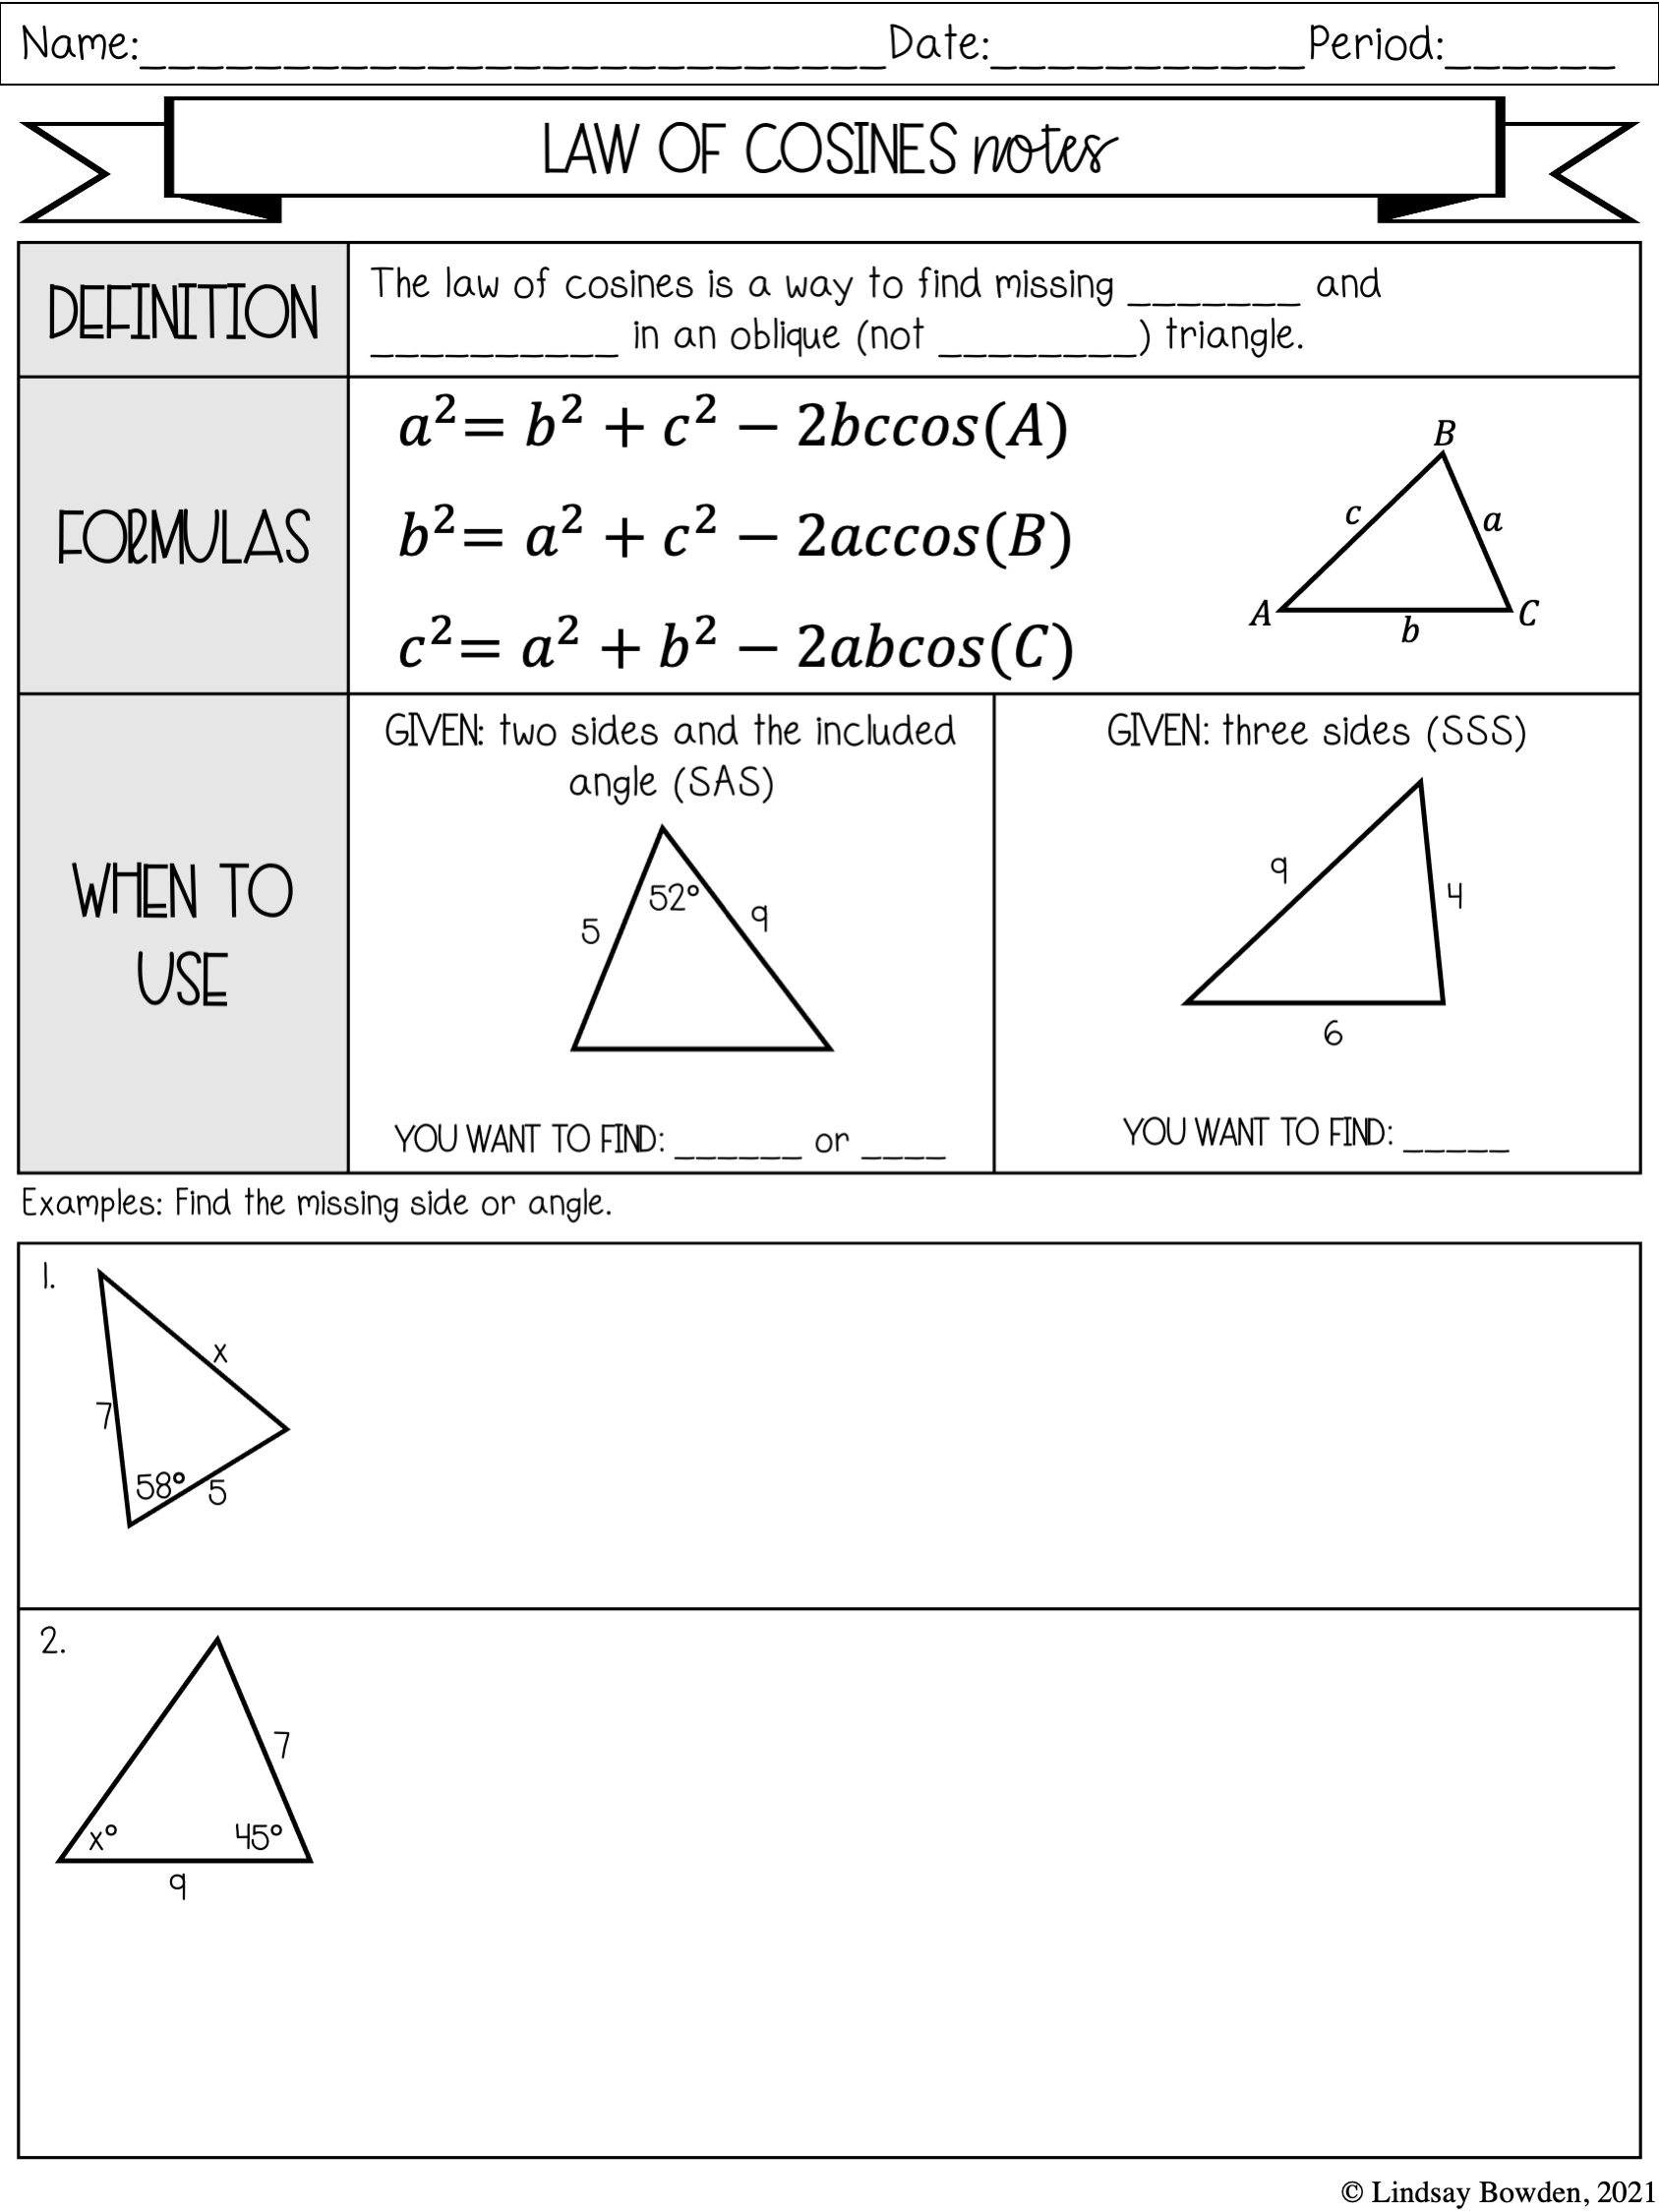 Law of Sines and Cosines Notes and Worksheets - Lindsay Bowden Inside Law Of Sines Worksheet